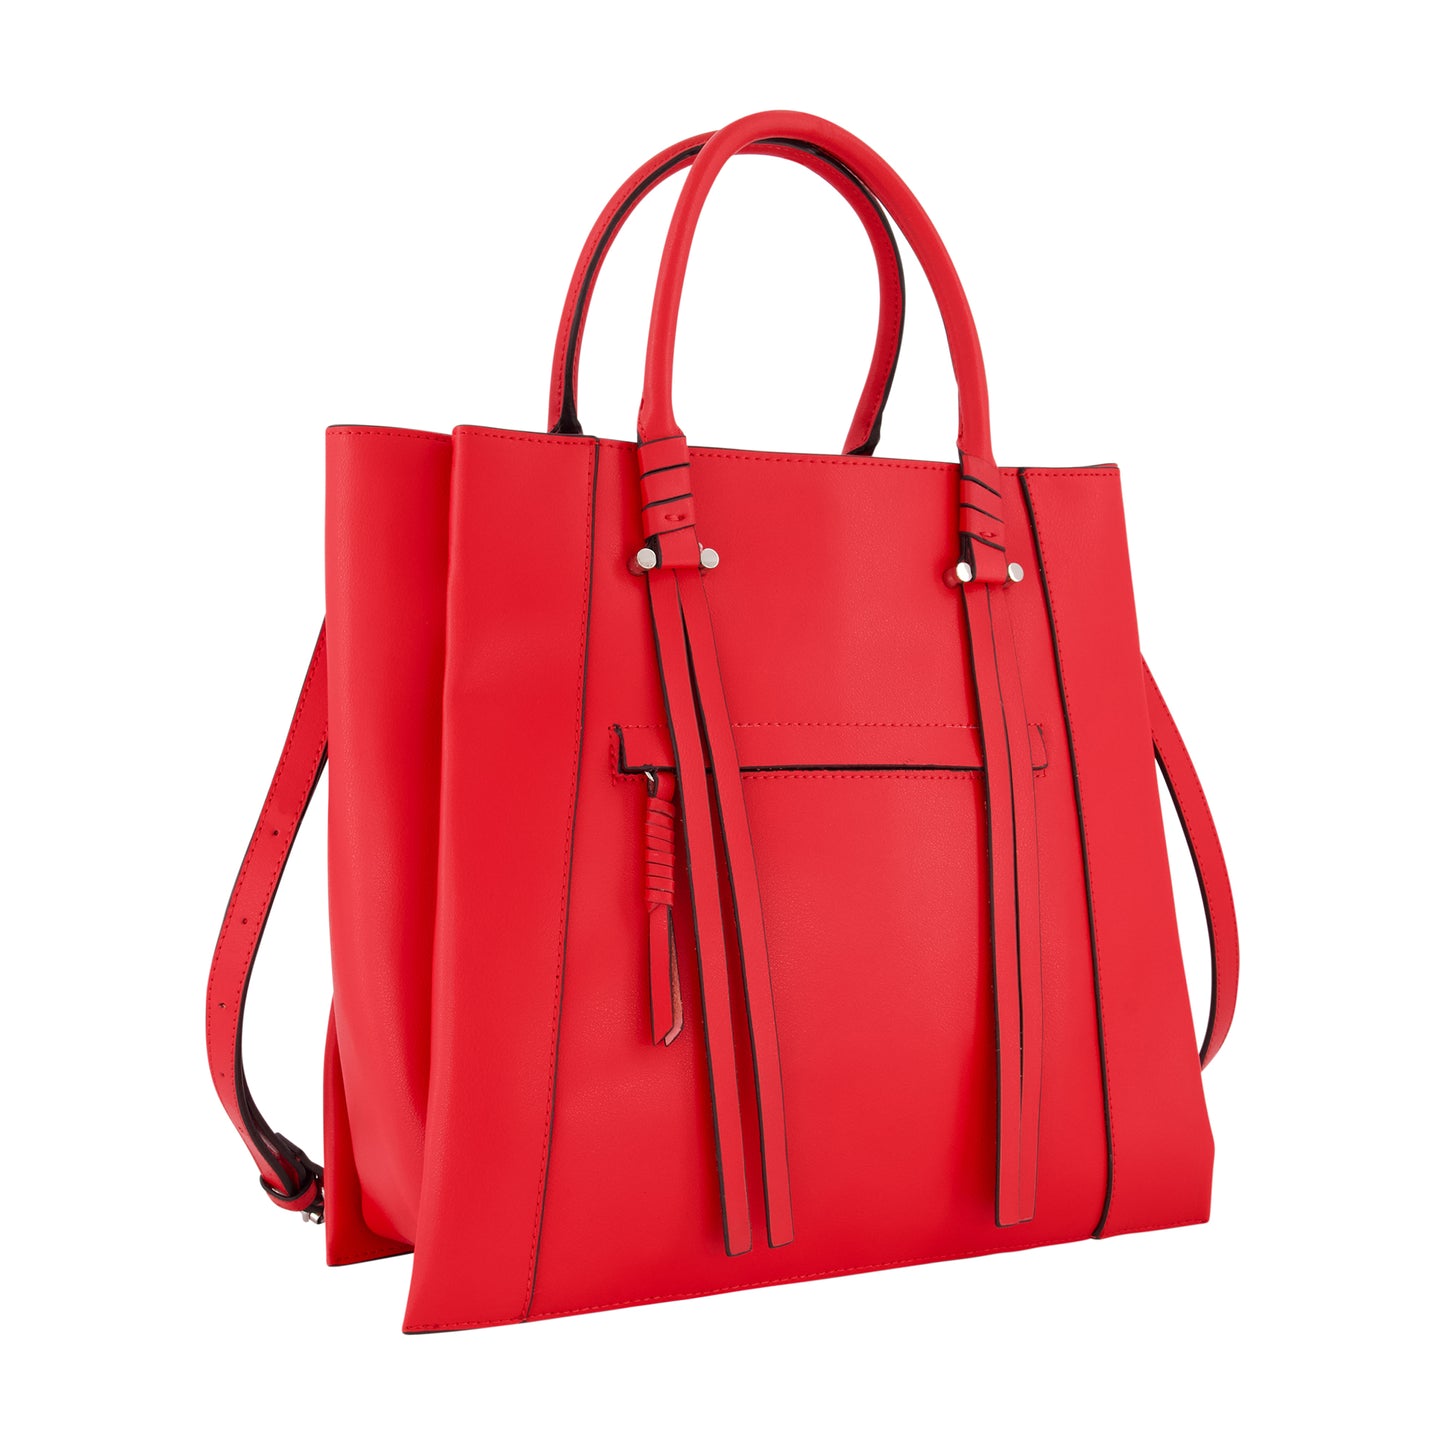 Everly Tote